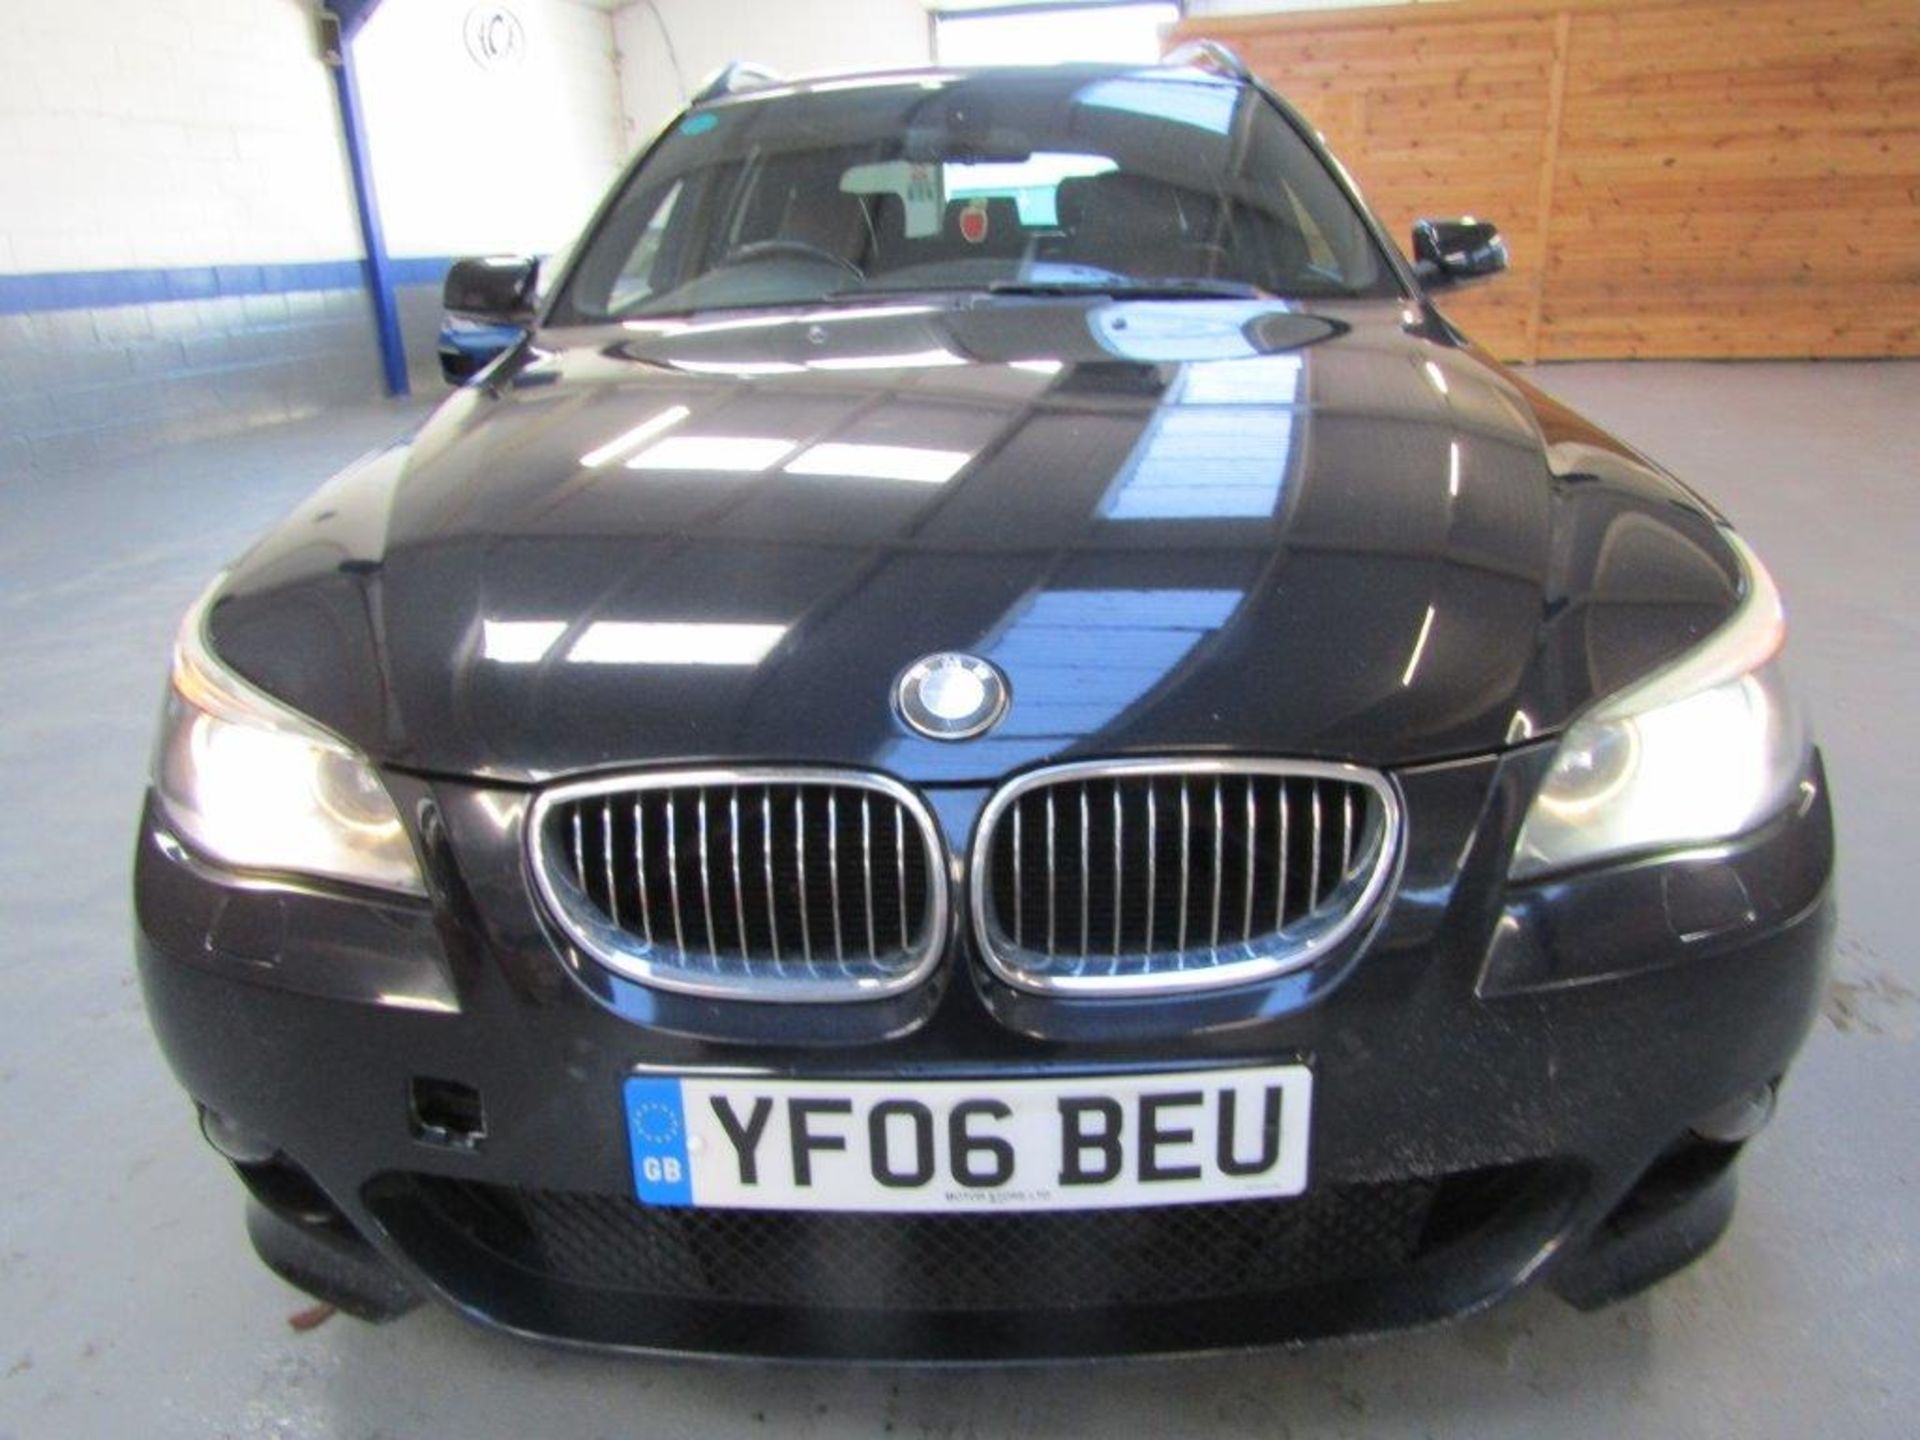 06 06 BMW 535D M Sport Touring Auto - Image 4 of 34